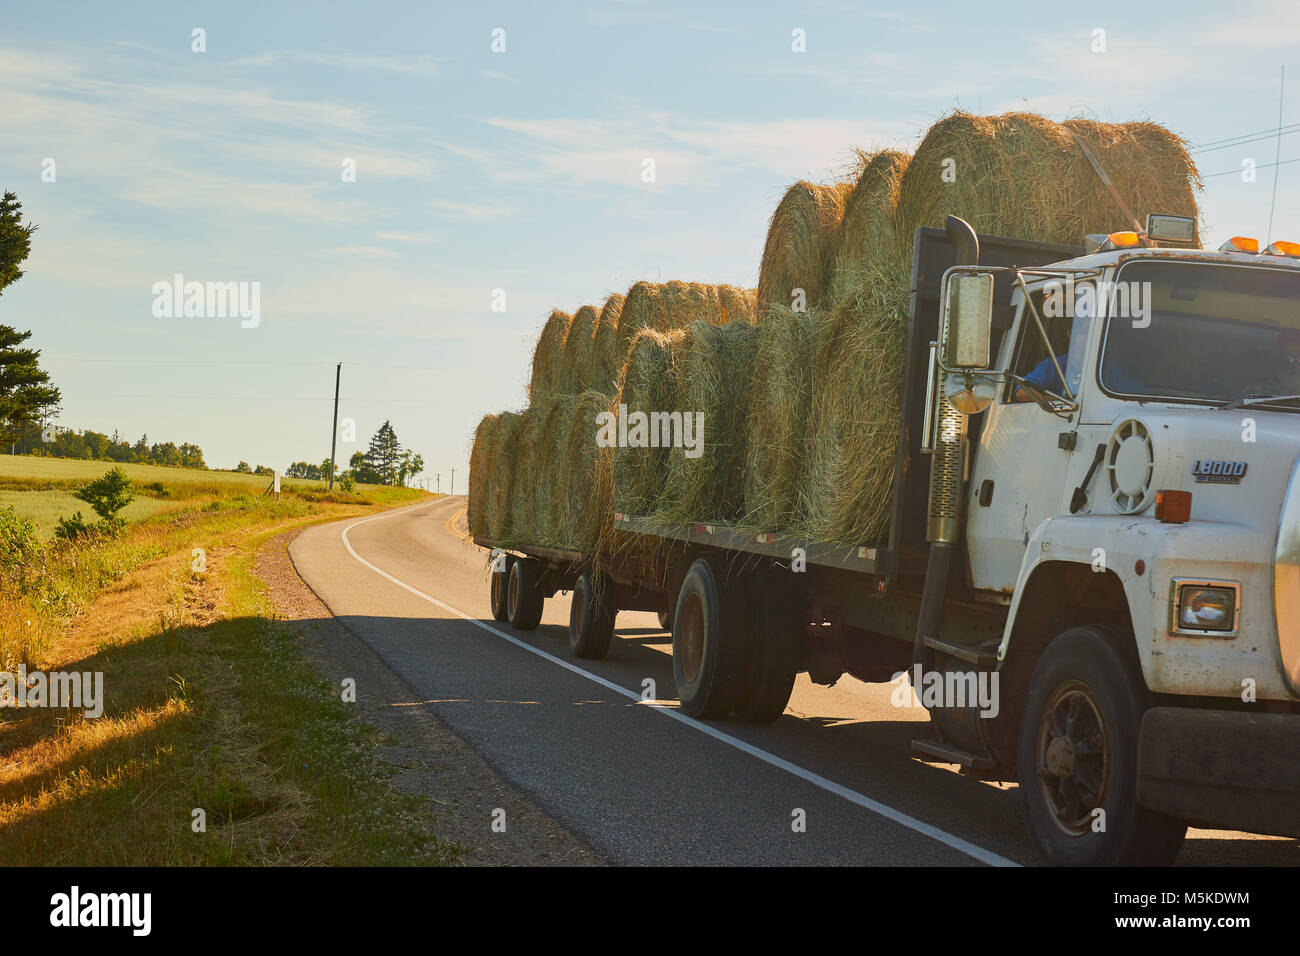 Lorry and trailer transporting bales of hay, Prince Edward Island, Canada (PEI), Canada Stock Photo